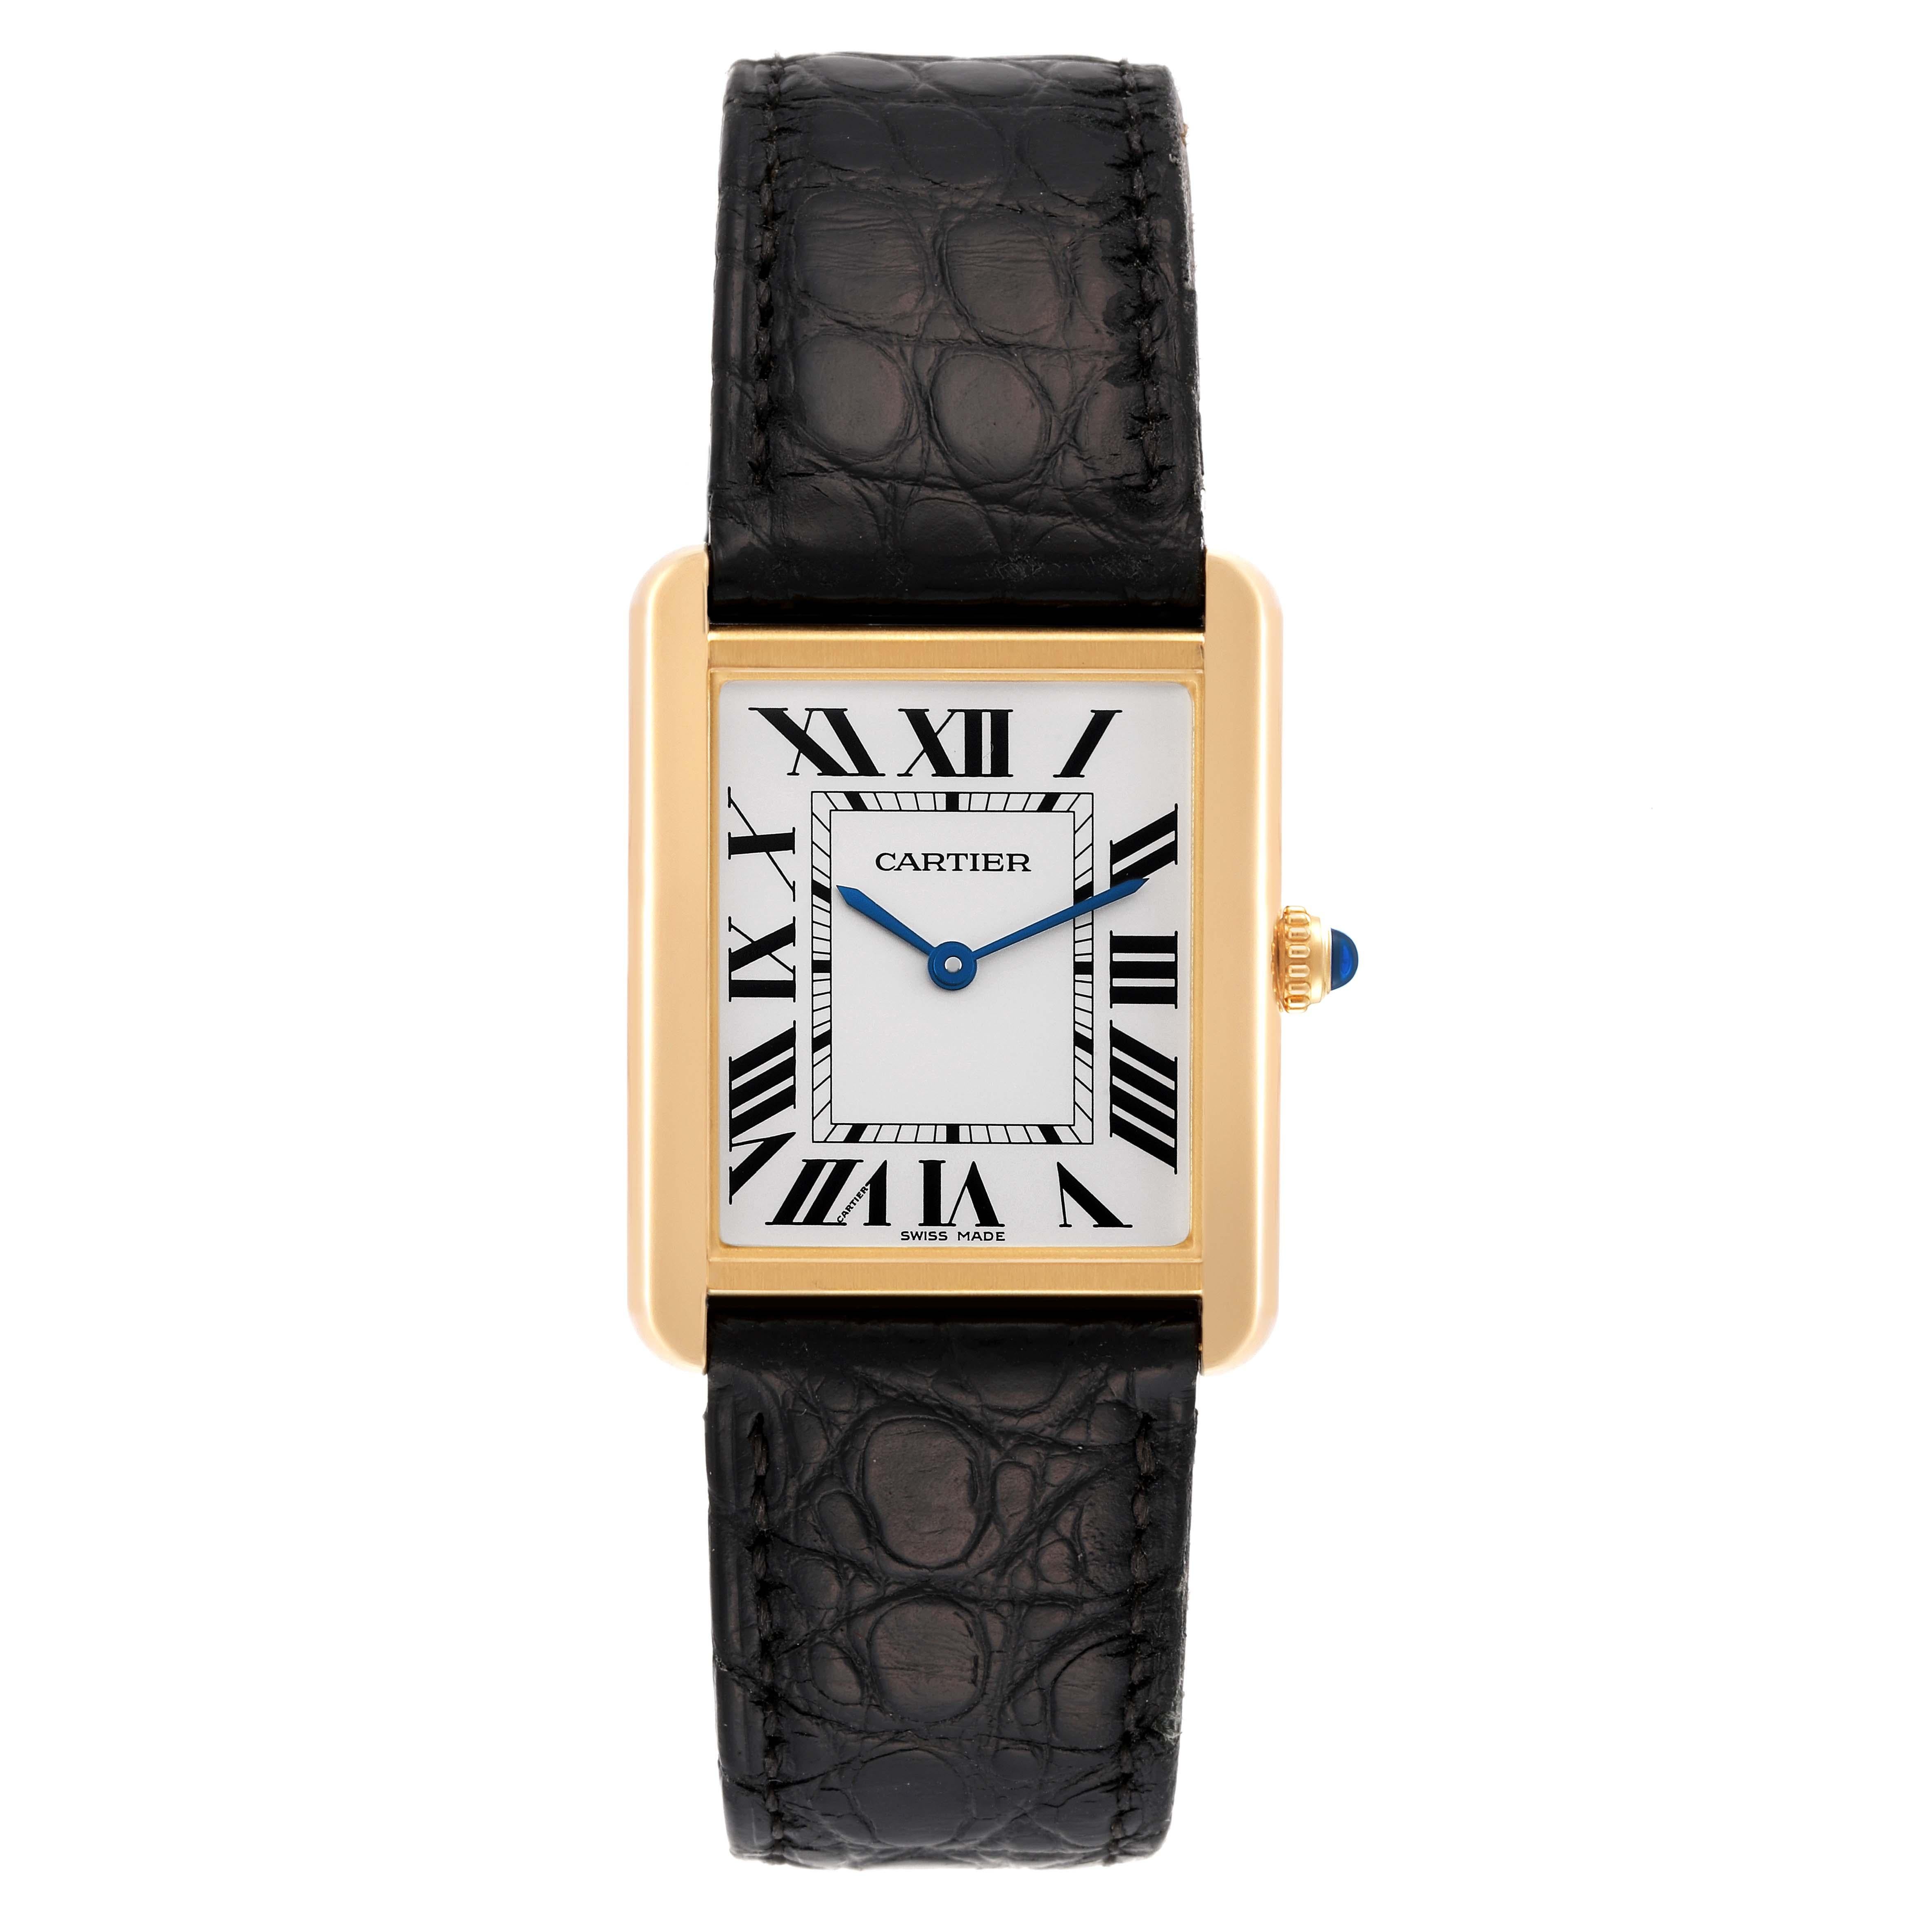 Cartier Tank Solo Large Yellow Gold Steel Mens Watch W5200004 Card. Quartz movement. 18k yellow gold case 34 mm x 27 mm. Stainless steel case back. Circular grained crown set with a blue spinel cabochon. . Scratch resistant sapphire crystal. Silver